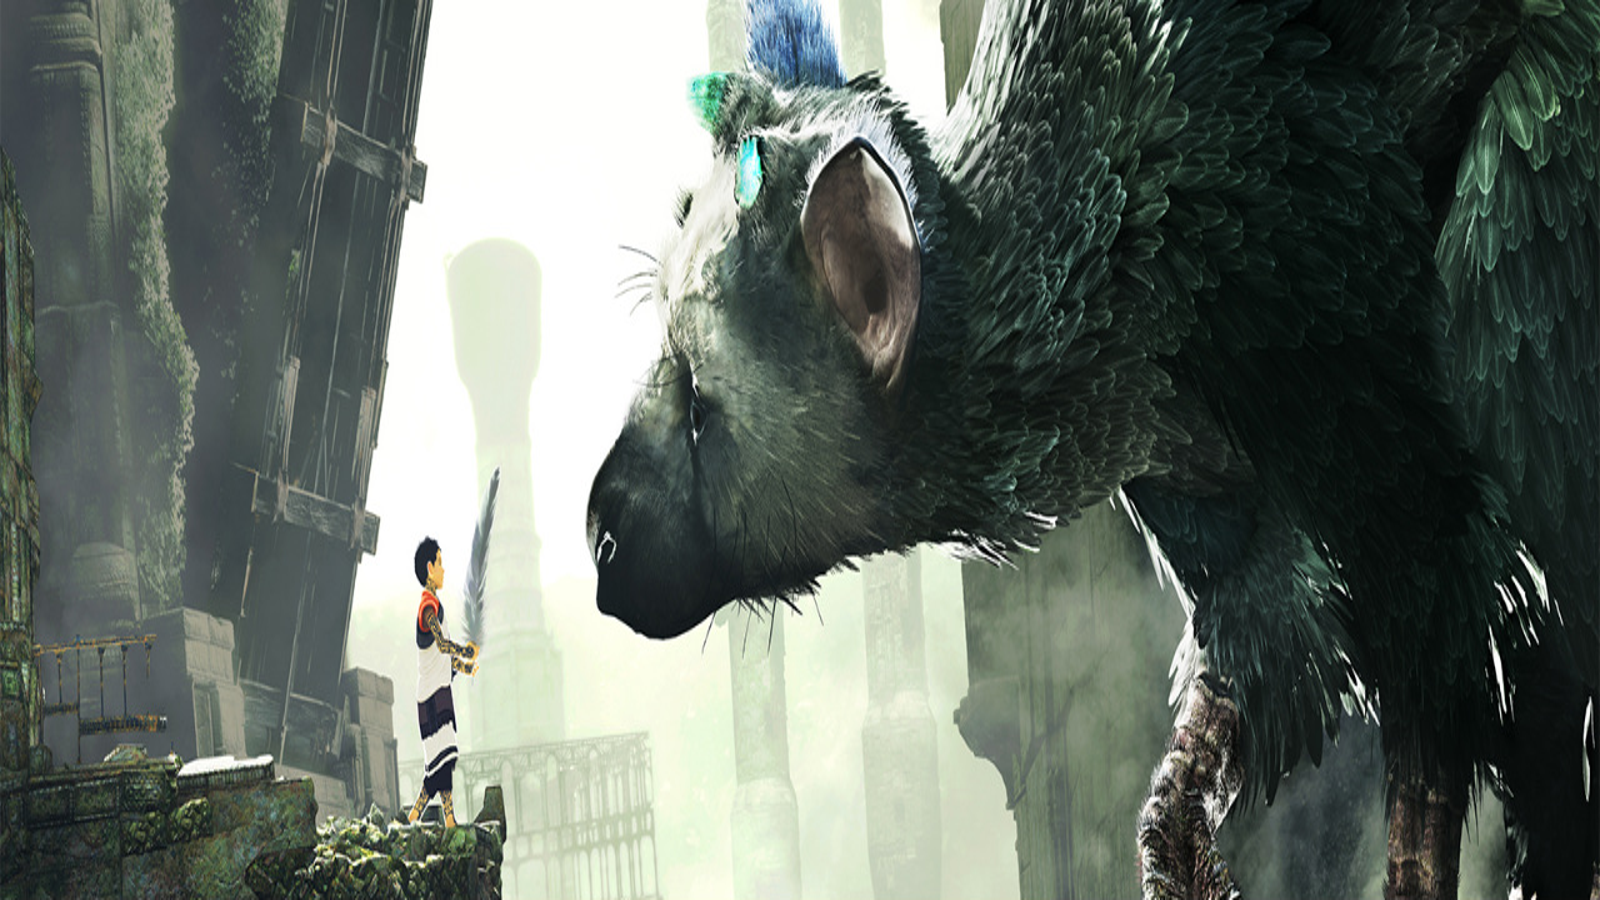 Shadow of the Colossus and The Last Guardian developers tease